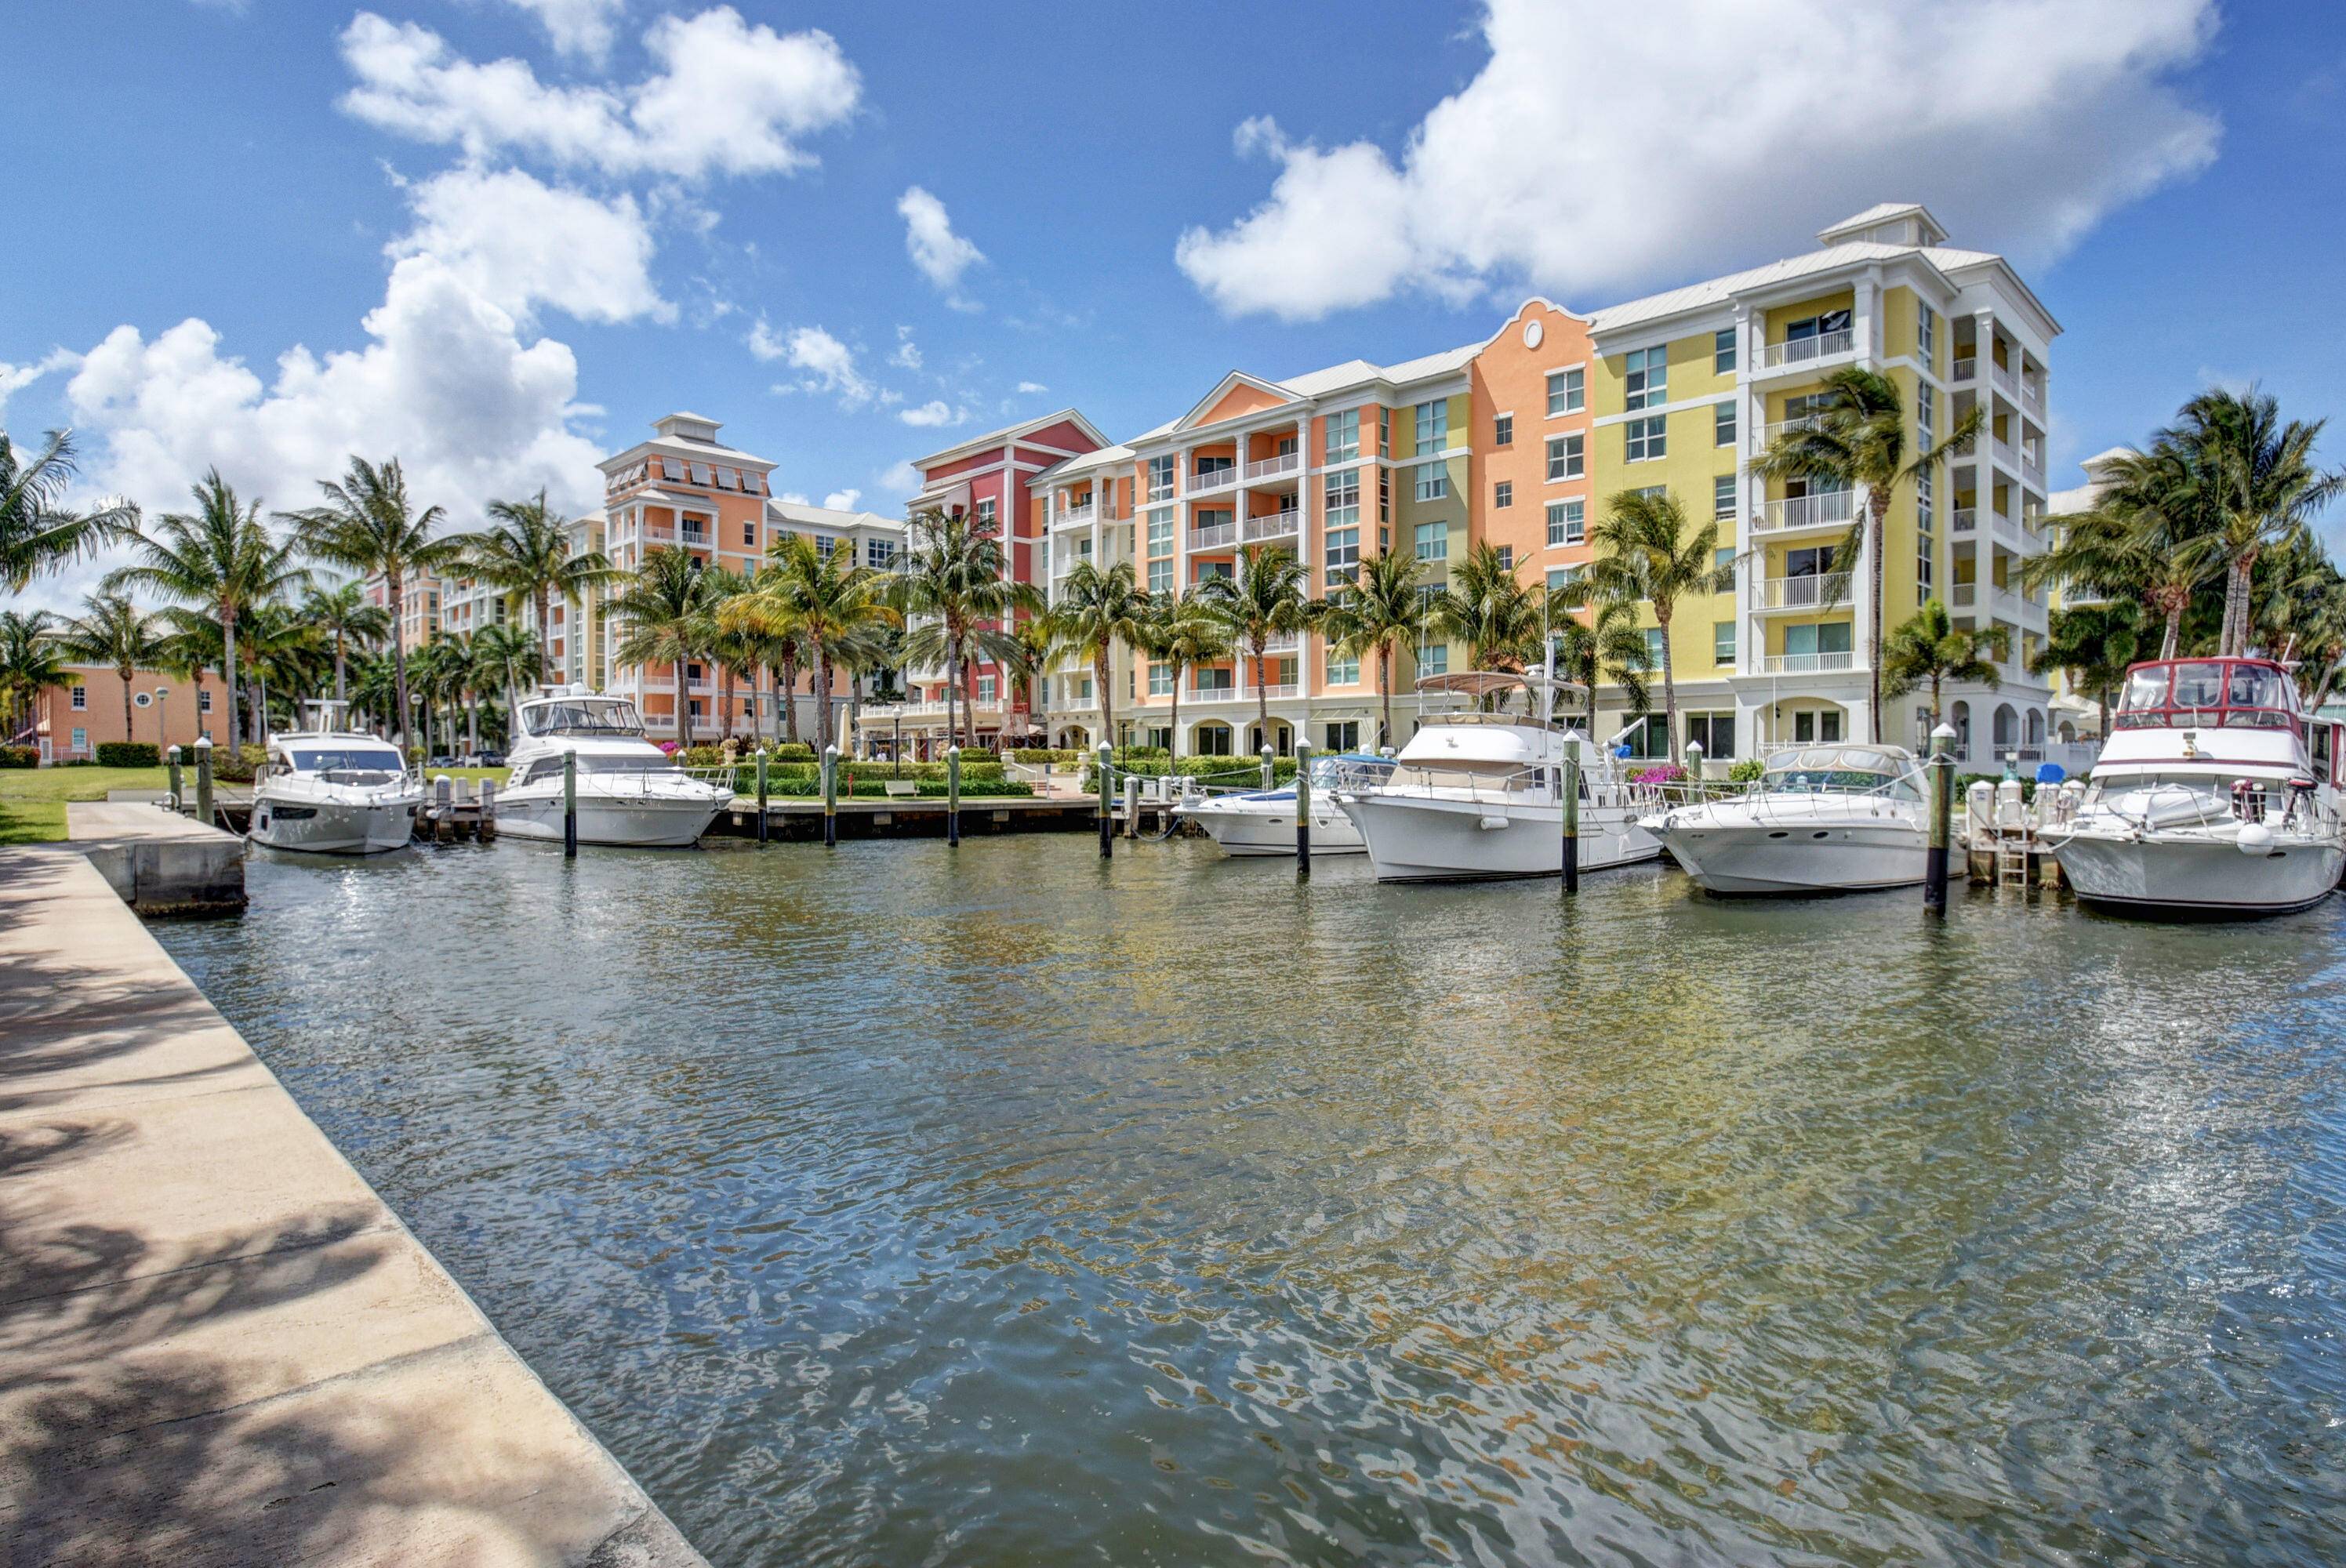 Welcome to The Moorings at Lantana, a resort style waterfront community centrally located in Palm Beach County.